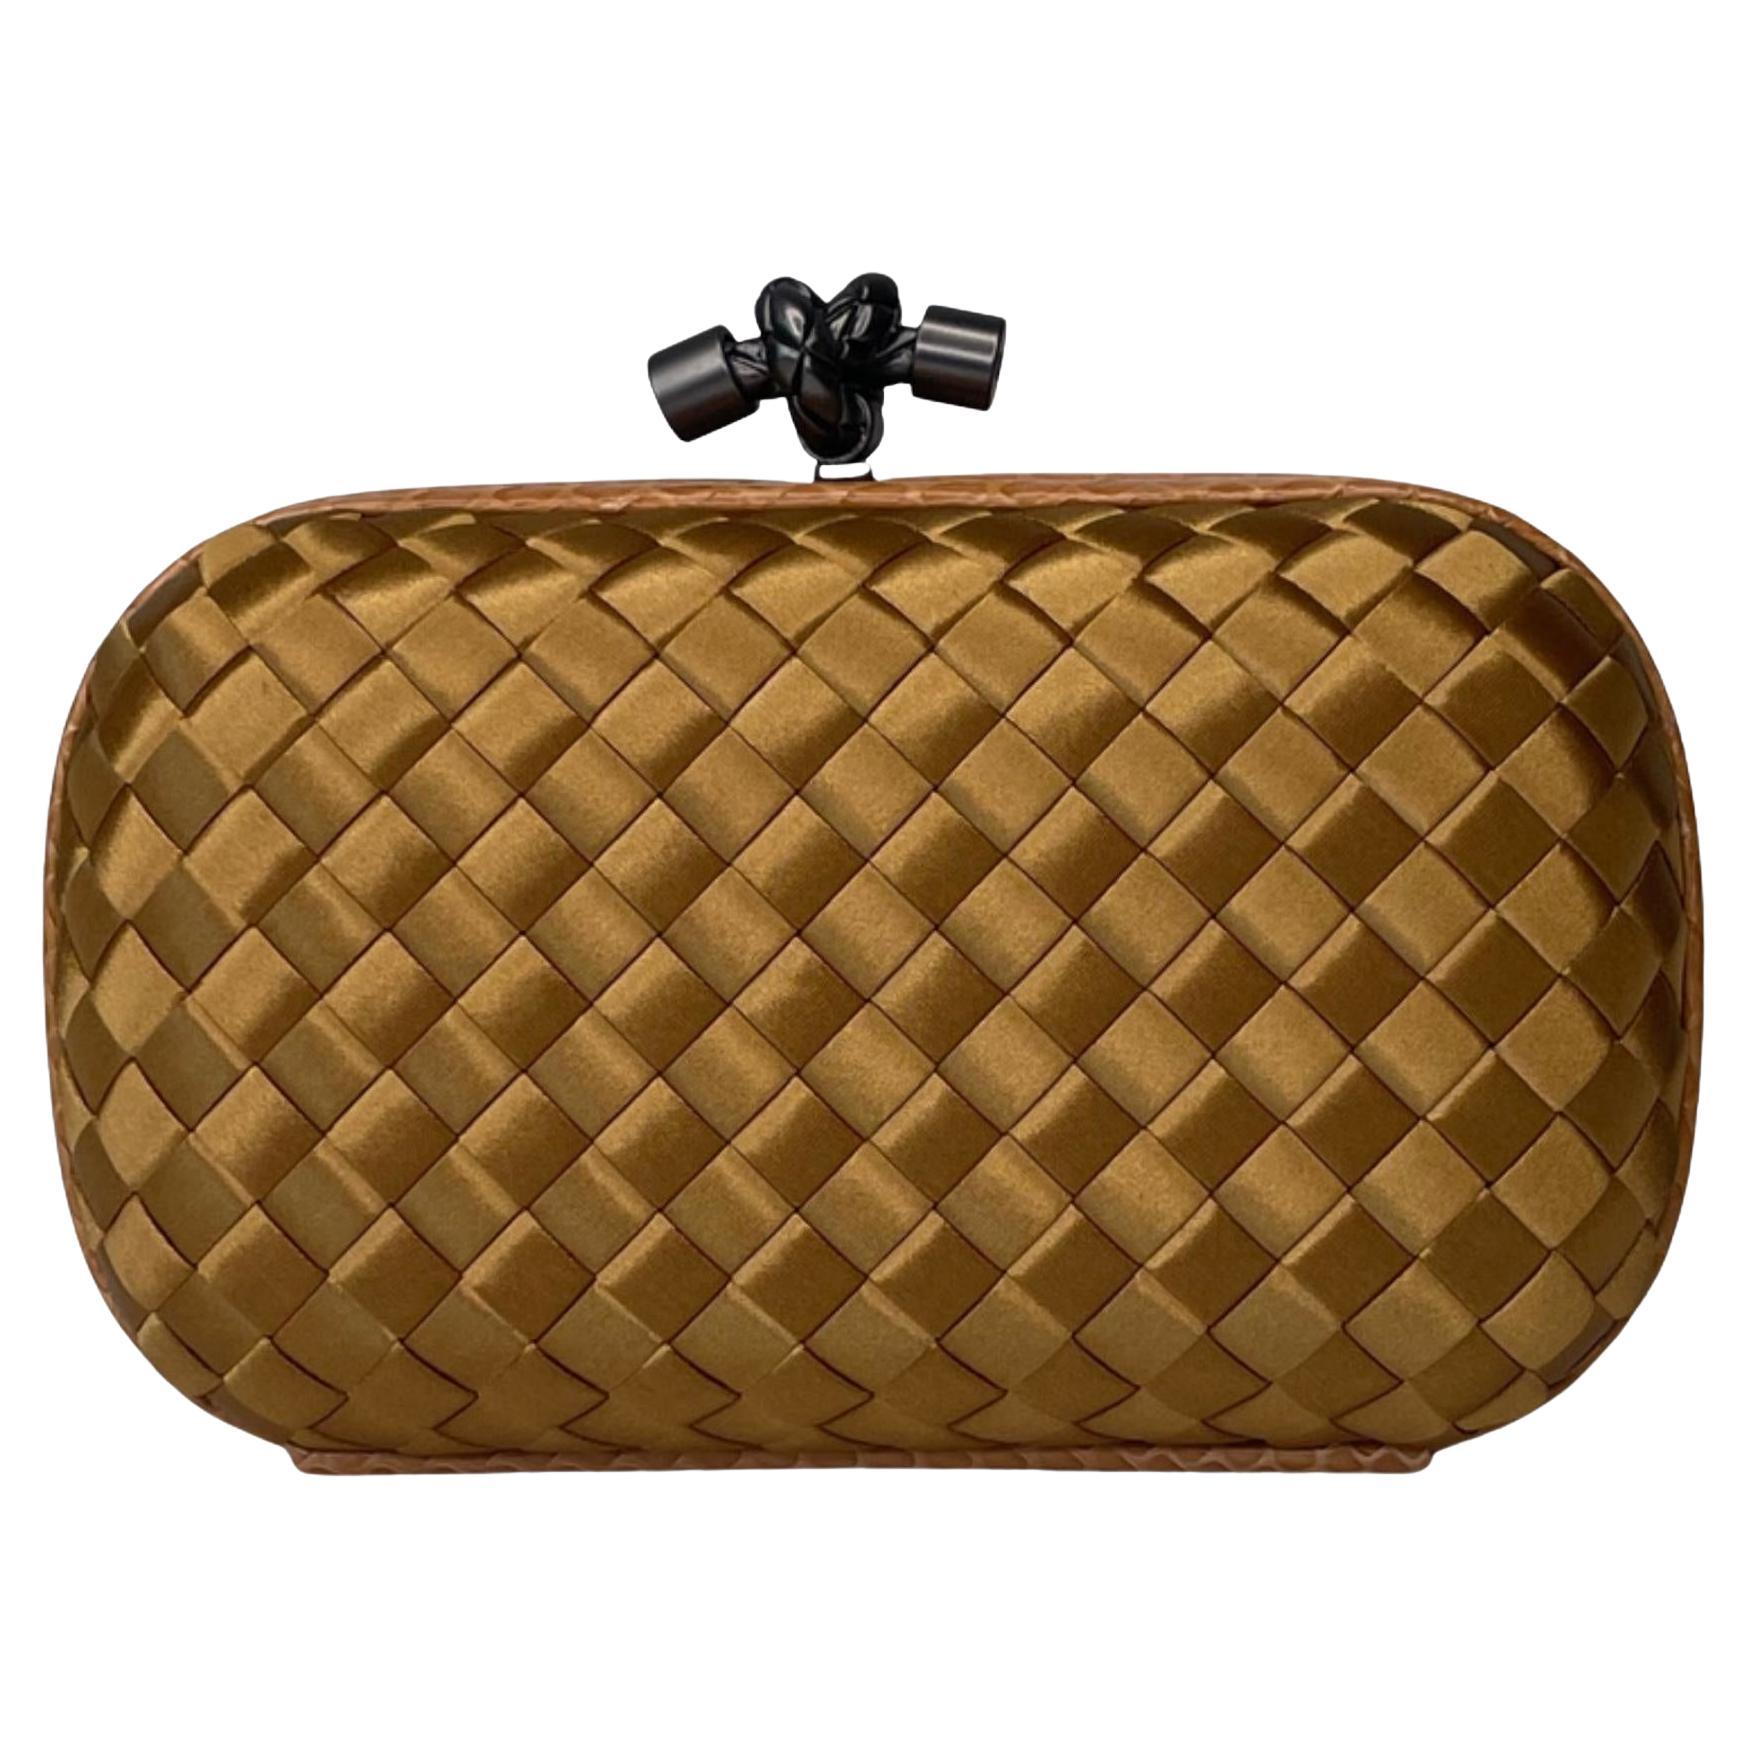 Saylor Collection Gold Knots Clutch